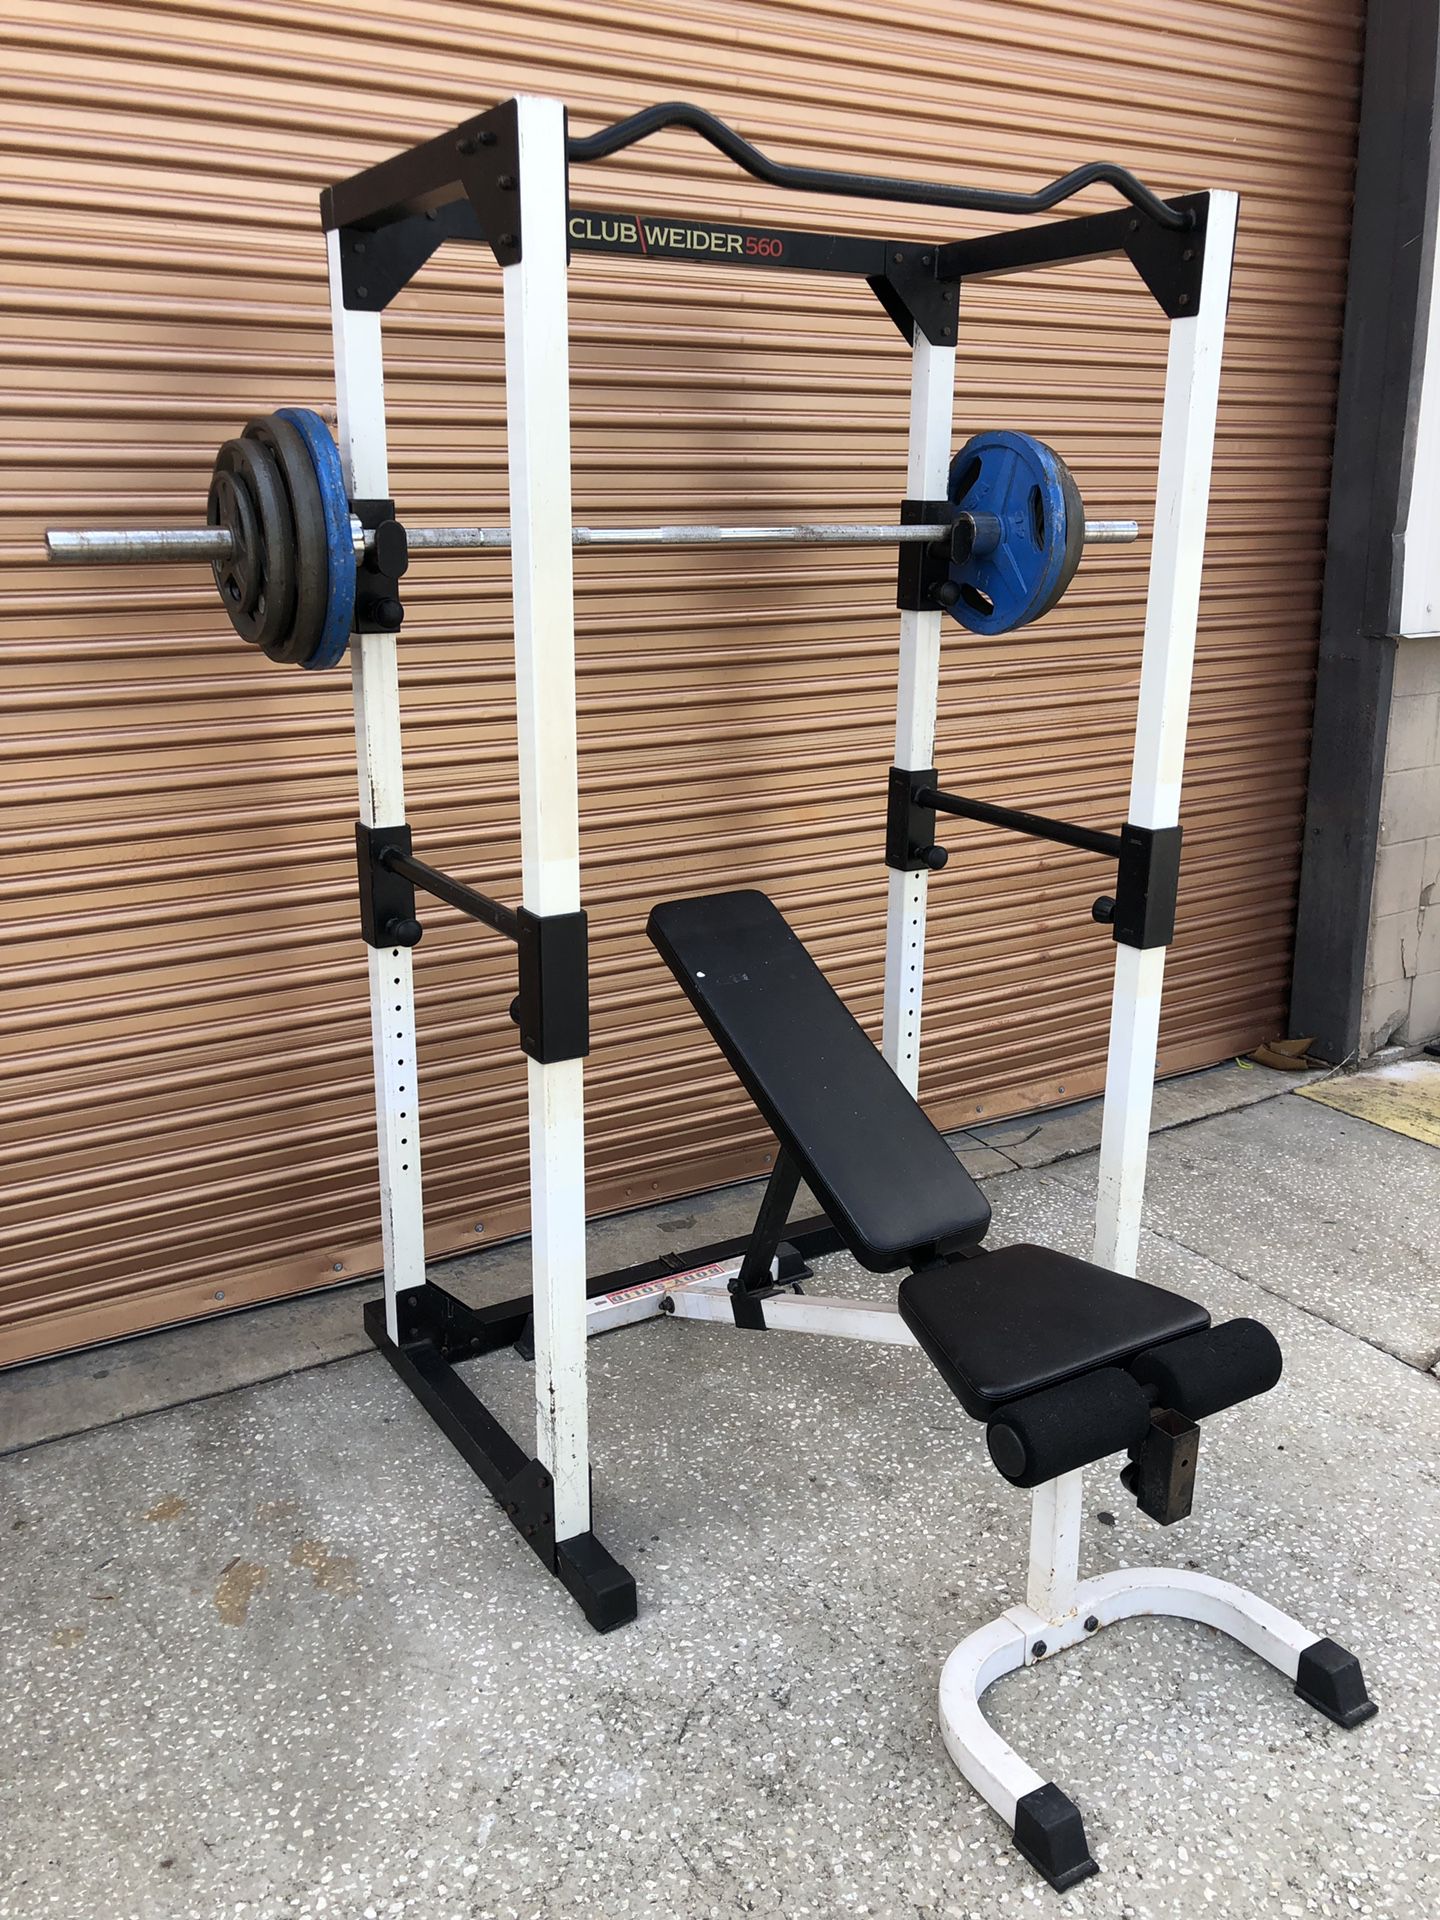 FullHeavy Duty Squat / Power Rack w/ Adjustable Bench, 265 Lb Olympic Weight Set Complete Home Gym